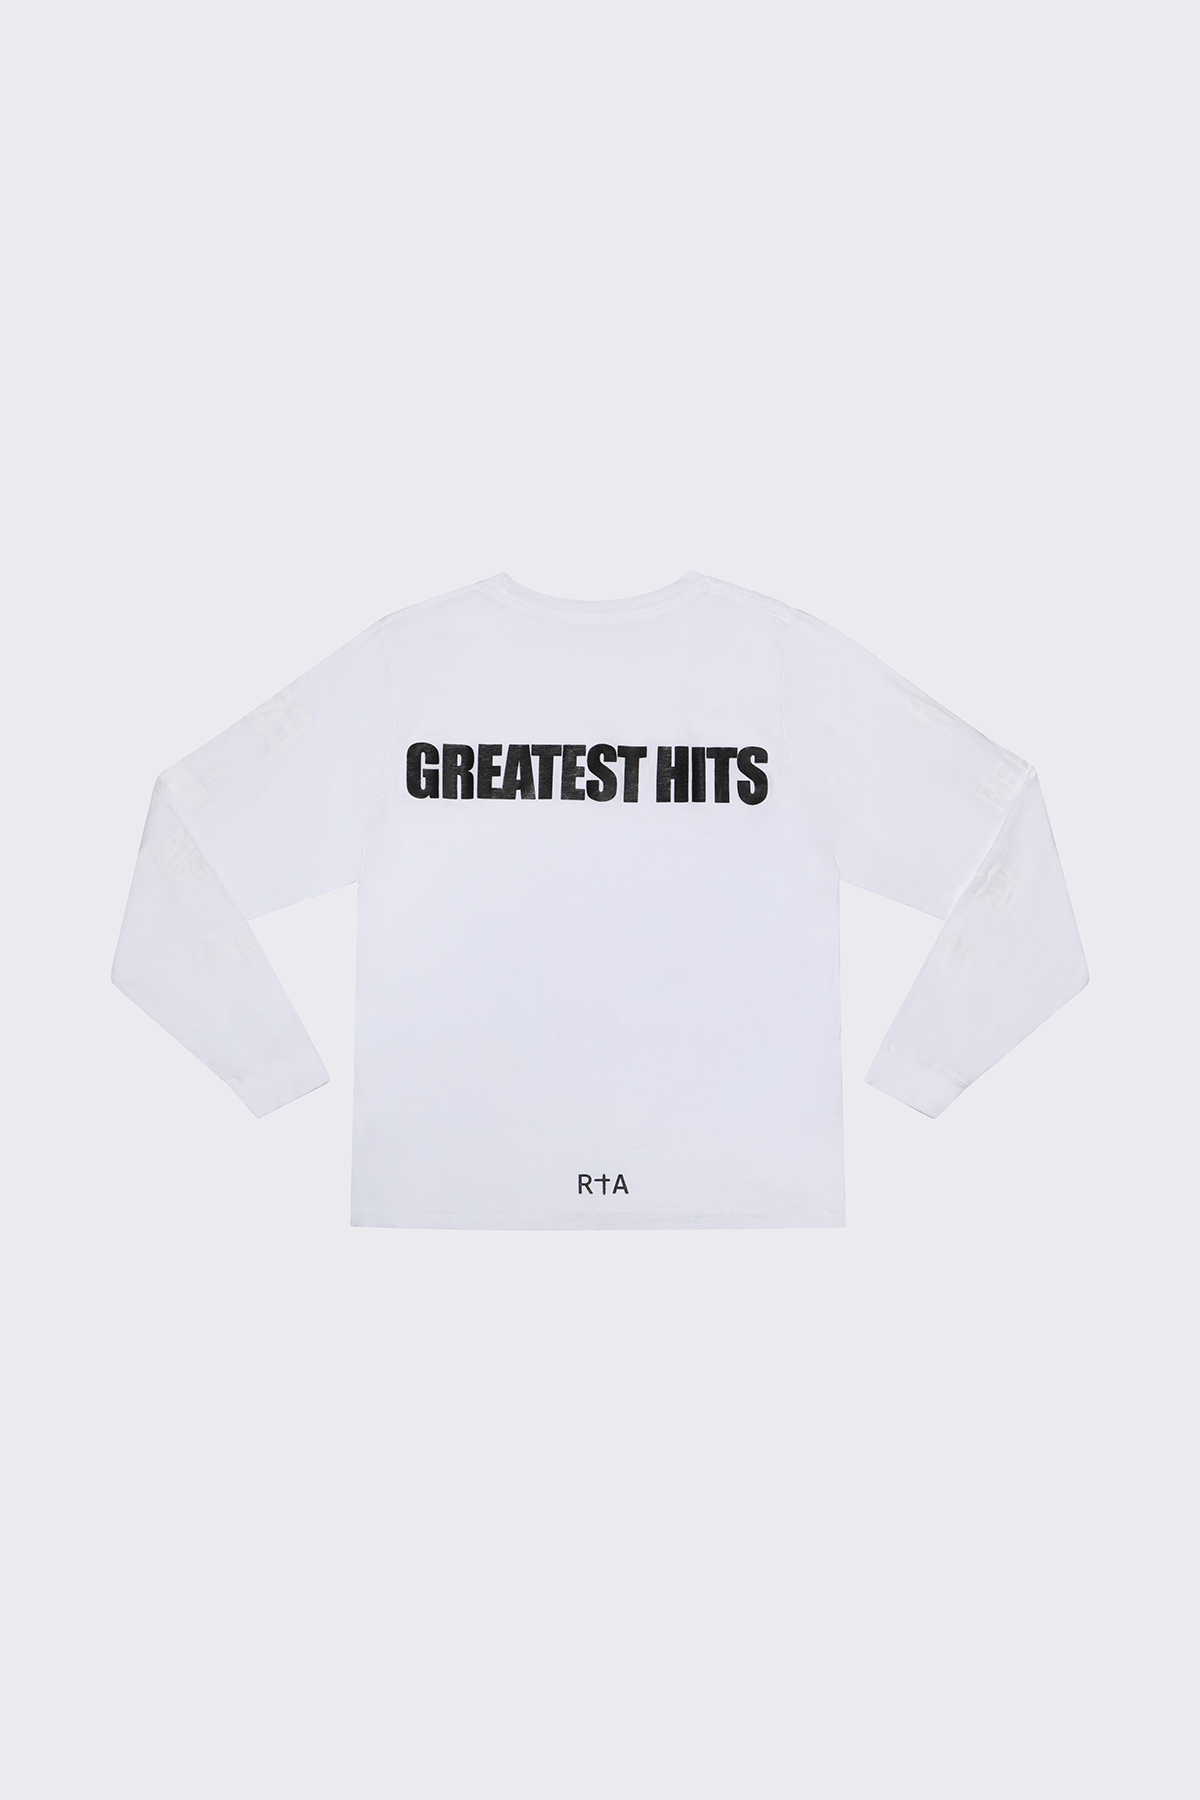 LAWRENCE LONG SLEEVE TEE | WHITE GREATEST HITS